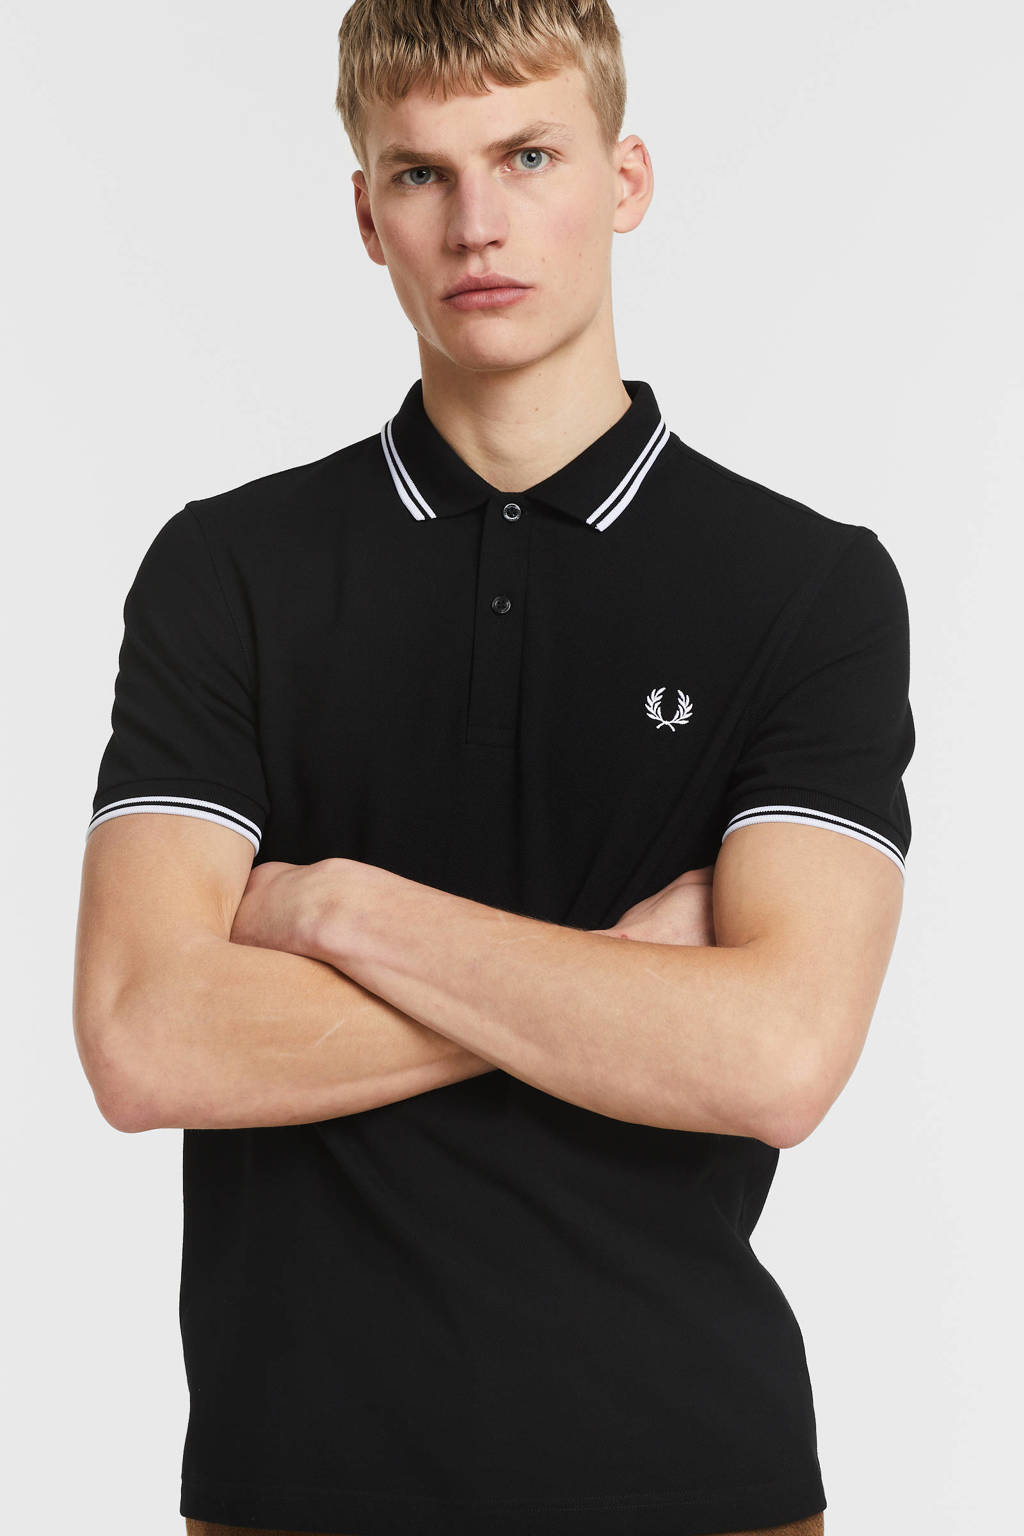 Fred Perry regular fit polo Twin tipped met contrastbies black/white